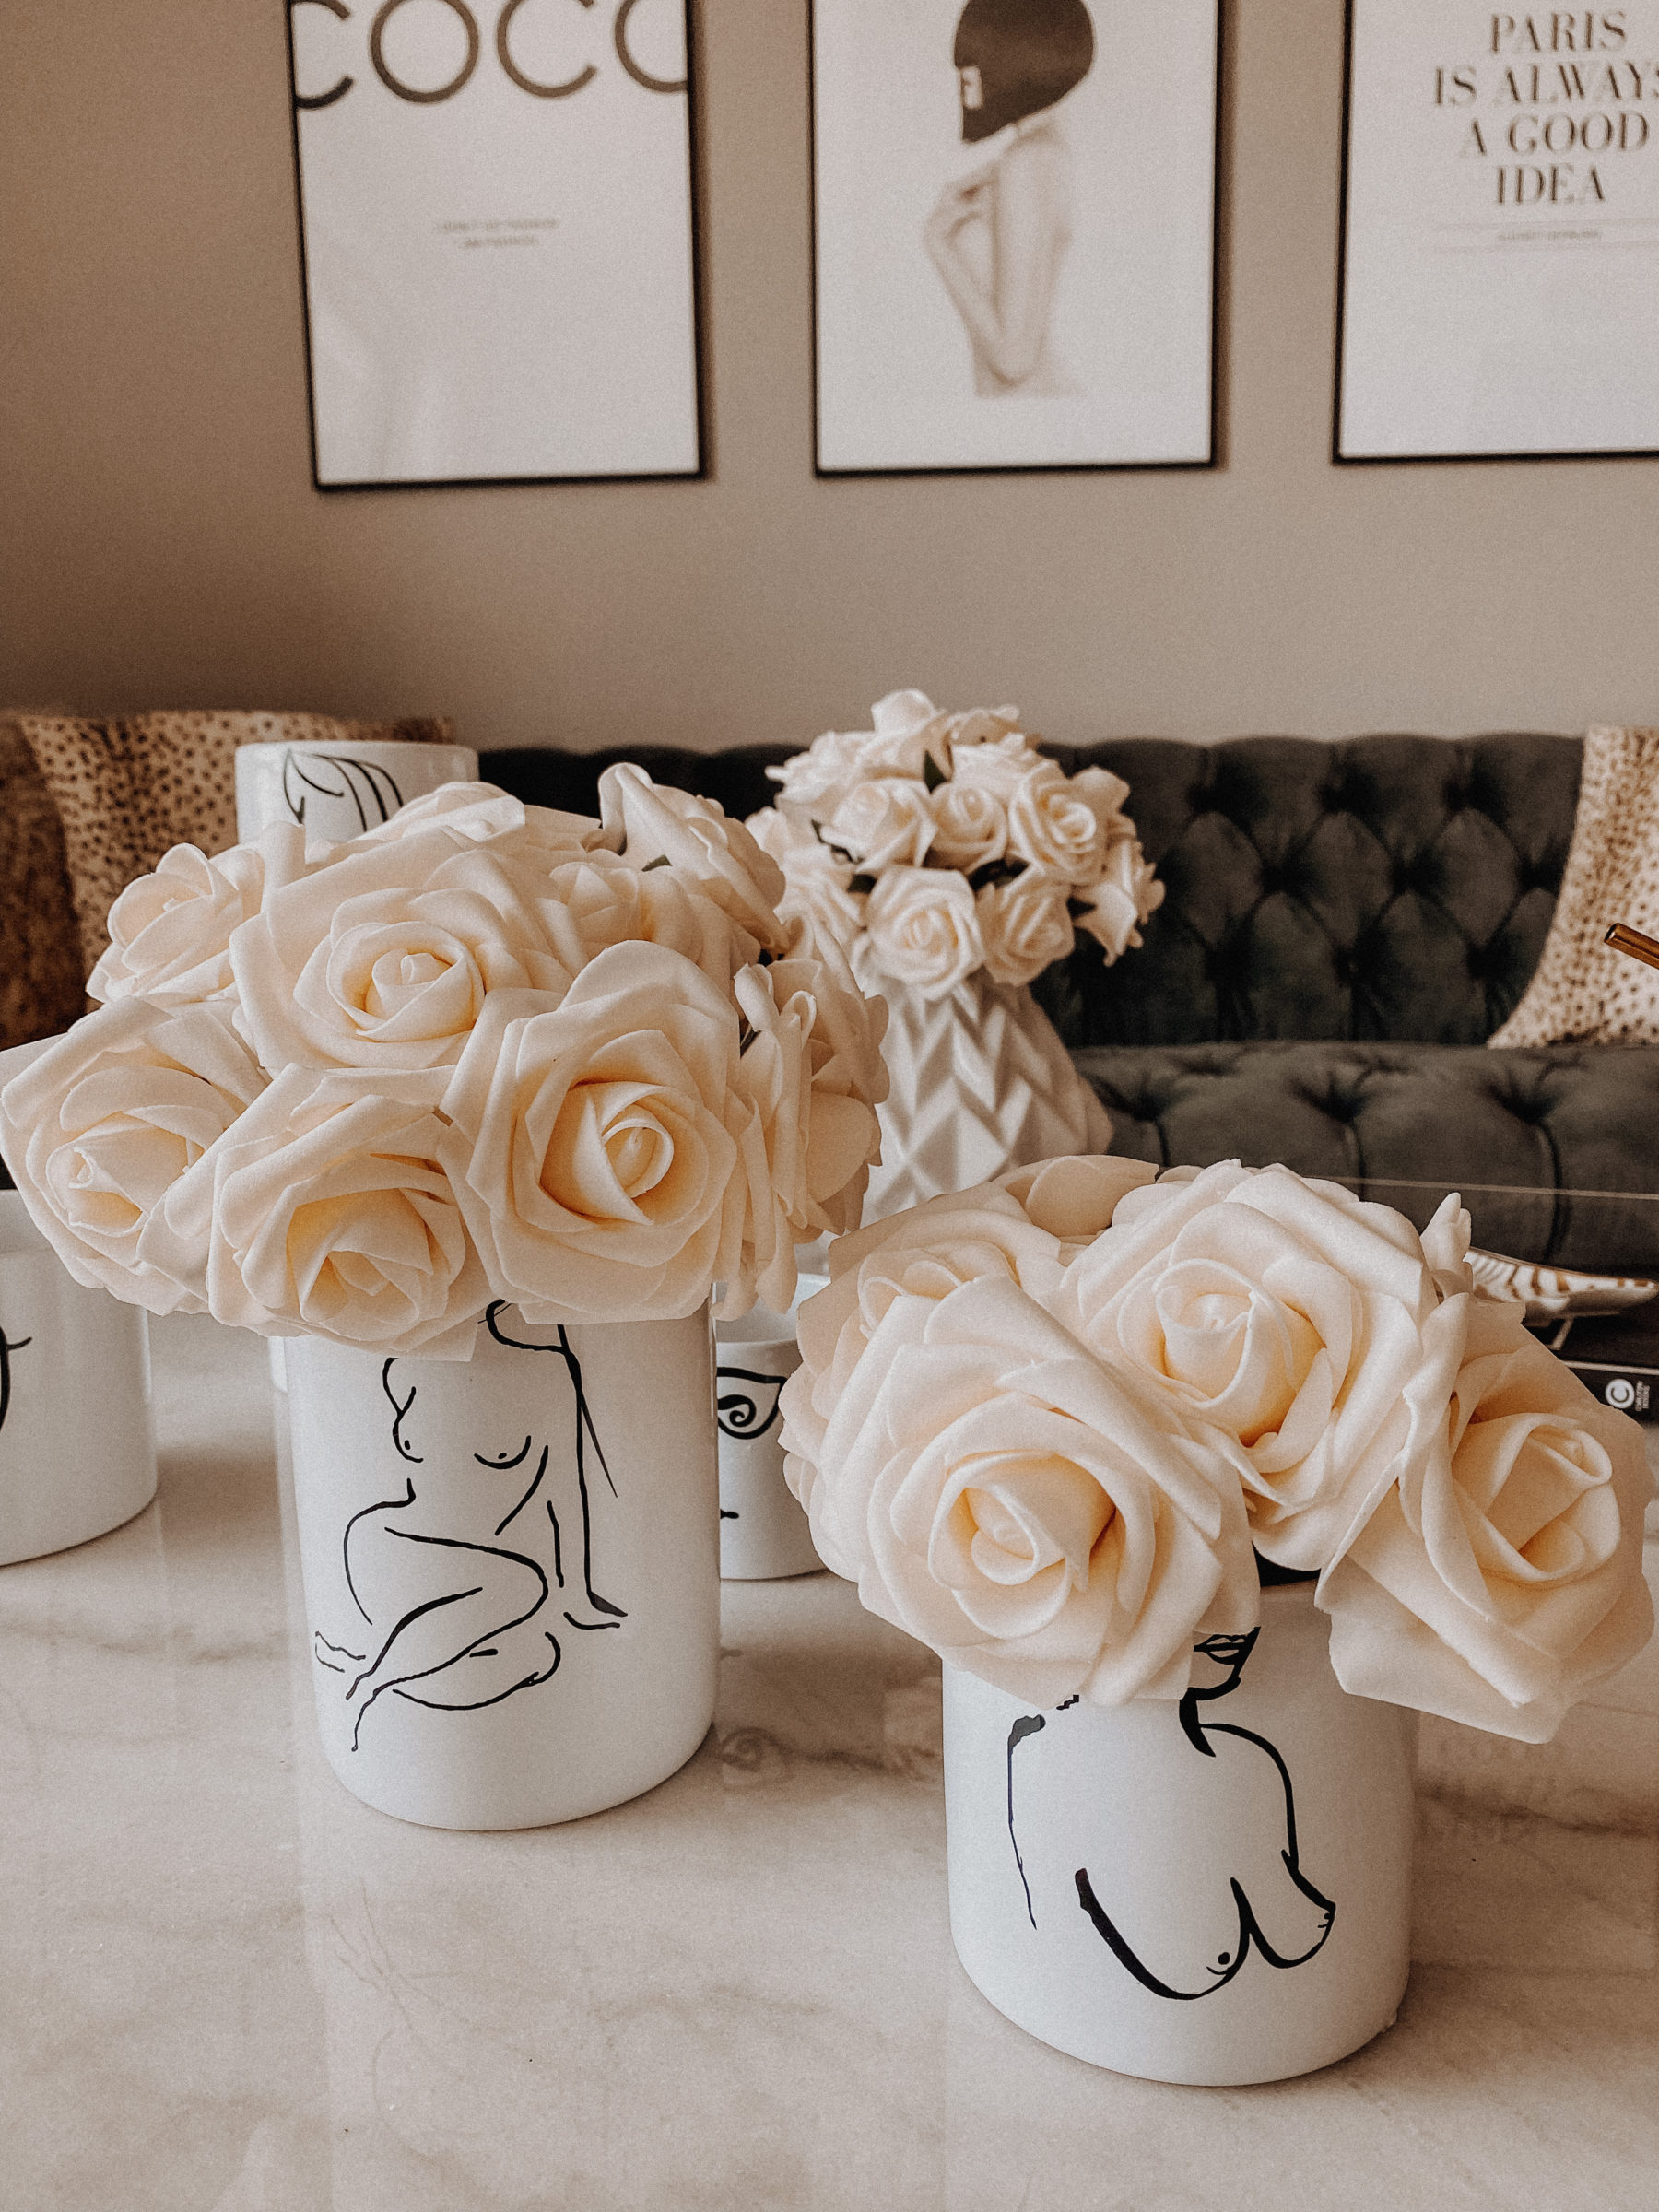 Abstract Vases w/ Faux Flowers from Amazon | Home Decor | Living Room Decor | Blondie in the City by Hayley Larue